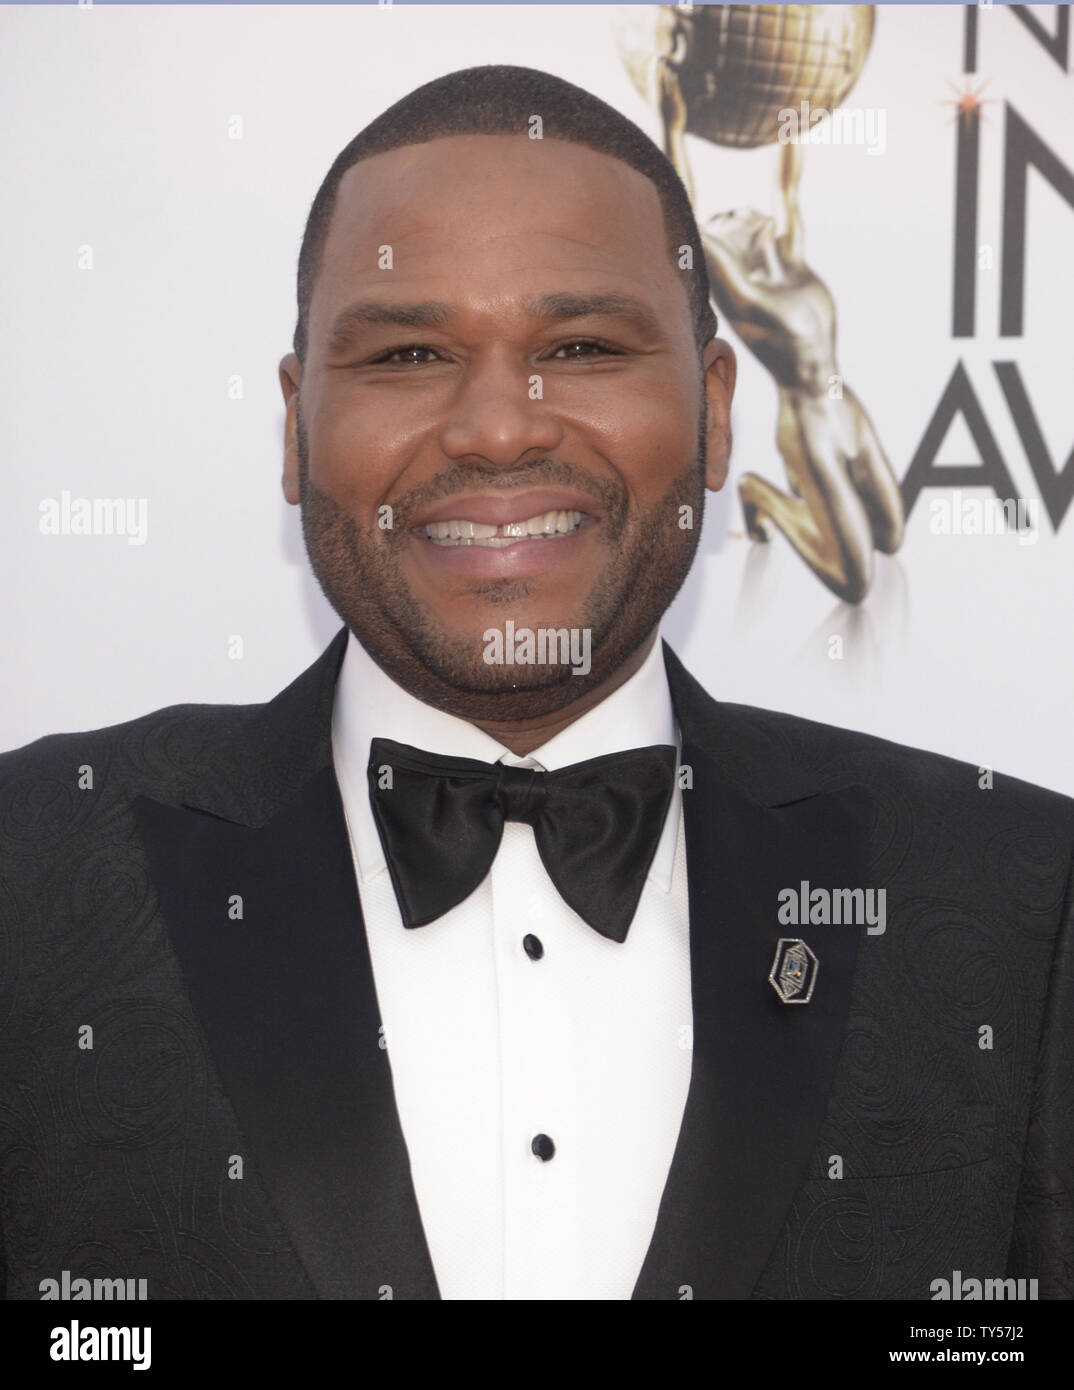 Actor Anthony Anderson arrives for the 46th NAACP Image Awards at the Pasadena Civic Auditorium in Pasadena, California on February 6, 2015. The NAACP Image Awards celebrates the accomplishments of people of color in the fields of television, music, literature and film and also honors individuals or groups who promote social justice through creative endeavors.  Photo by Phil McCarten/UPI Stock Photo